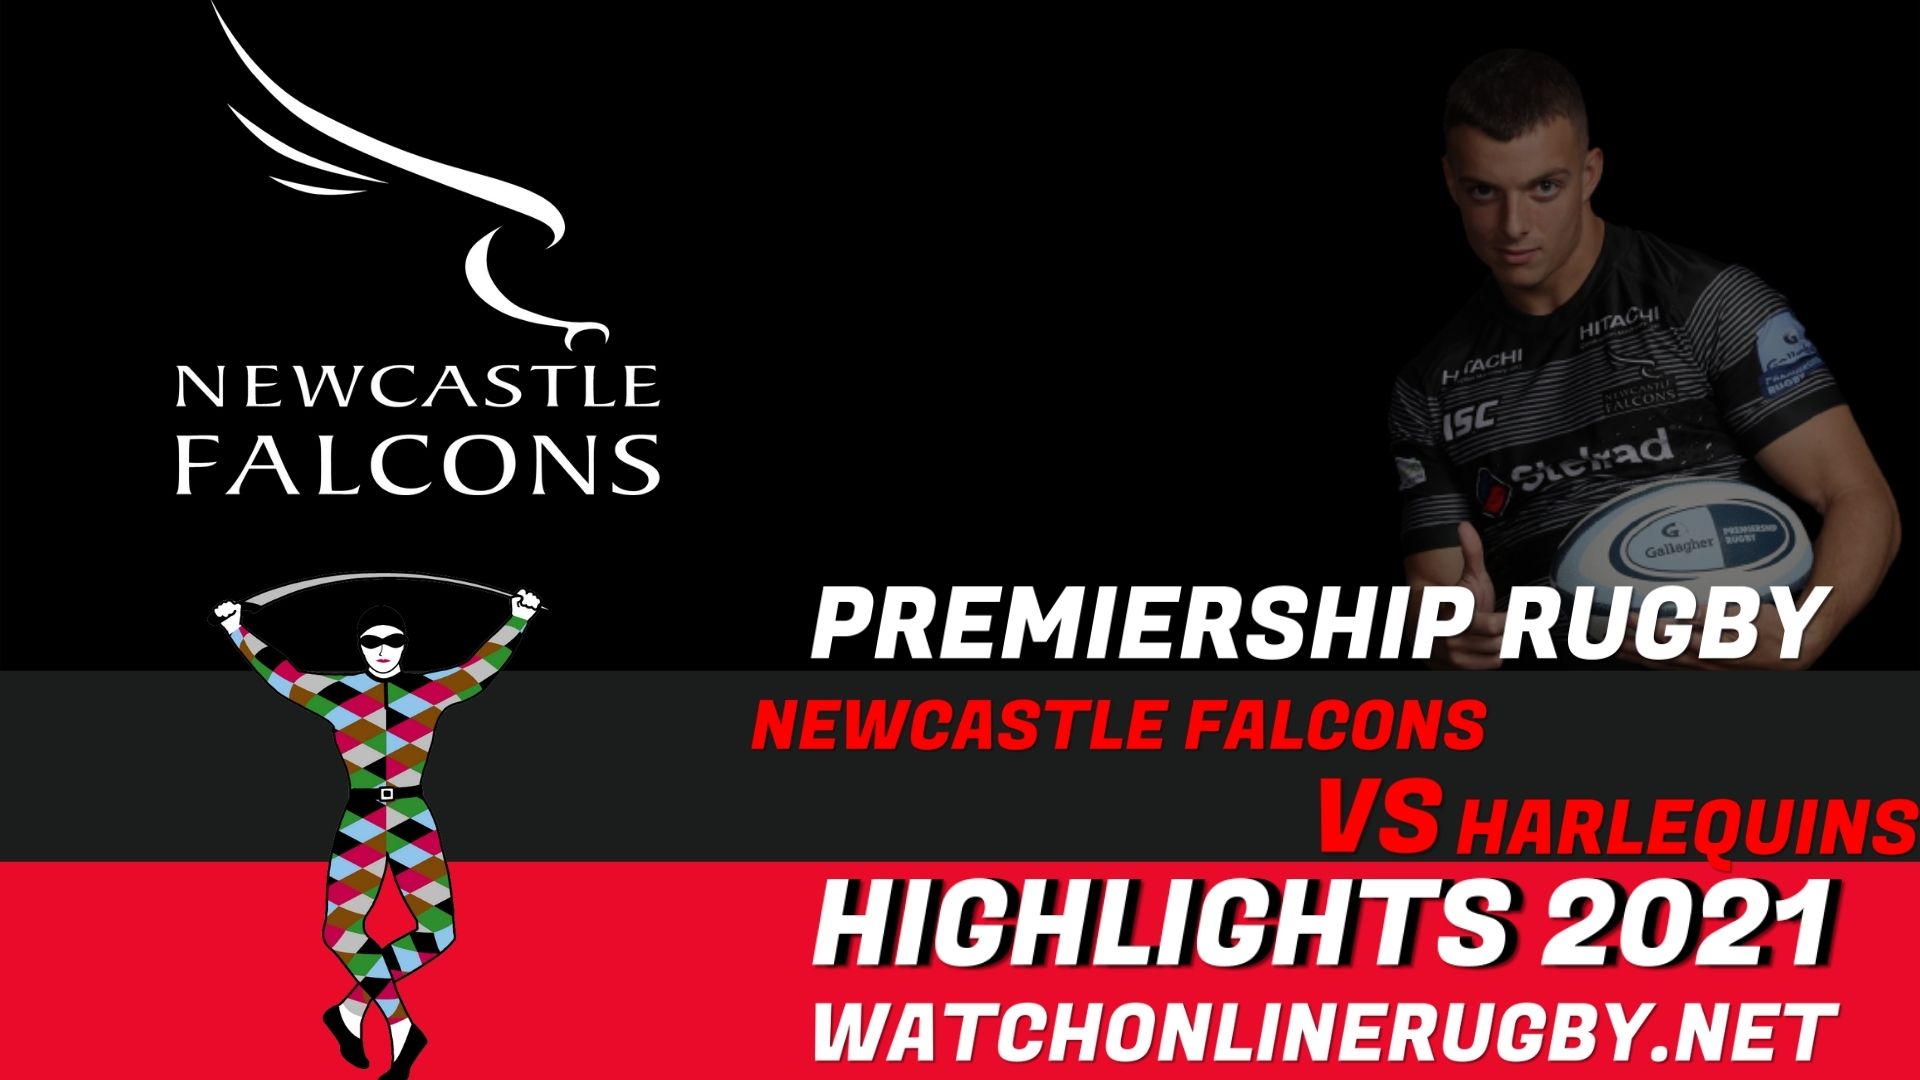 Newcastle Falcons Vs Harlequins Premiership Rugby 2021 RD 1